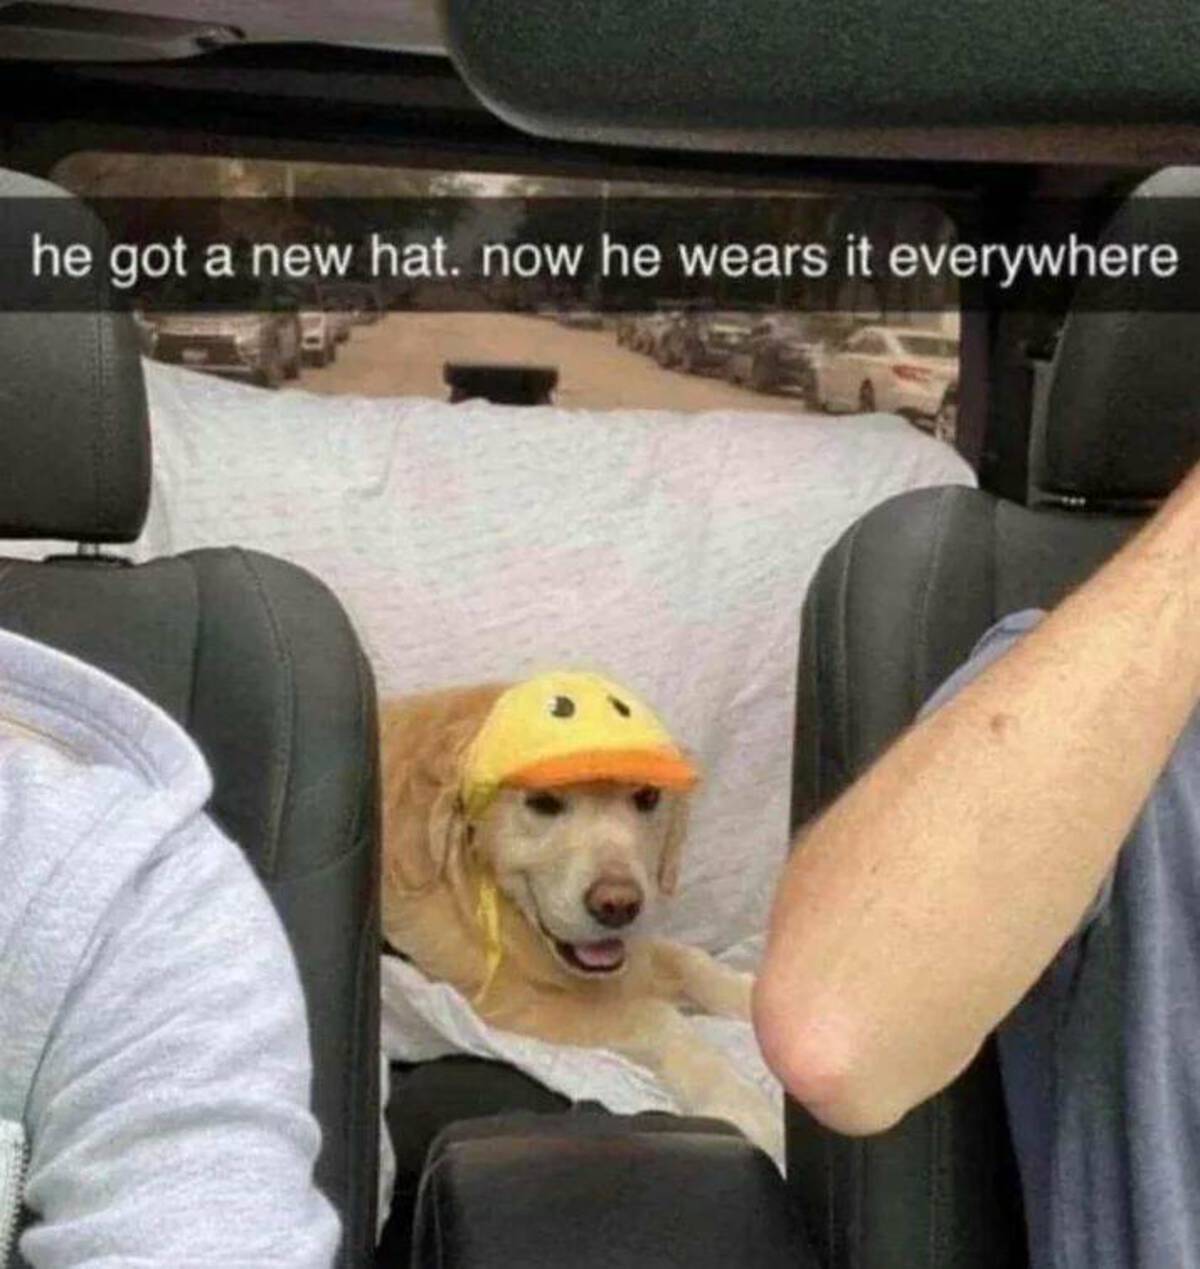 car seat - he got a new hat. now he wears it everywhere